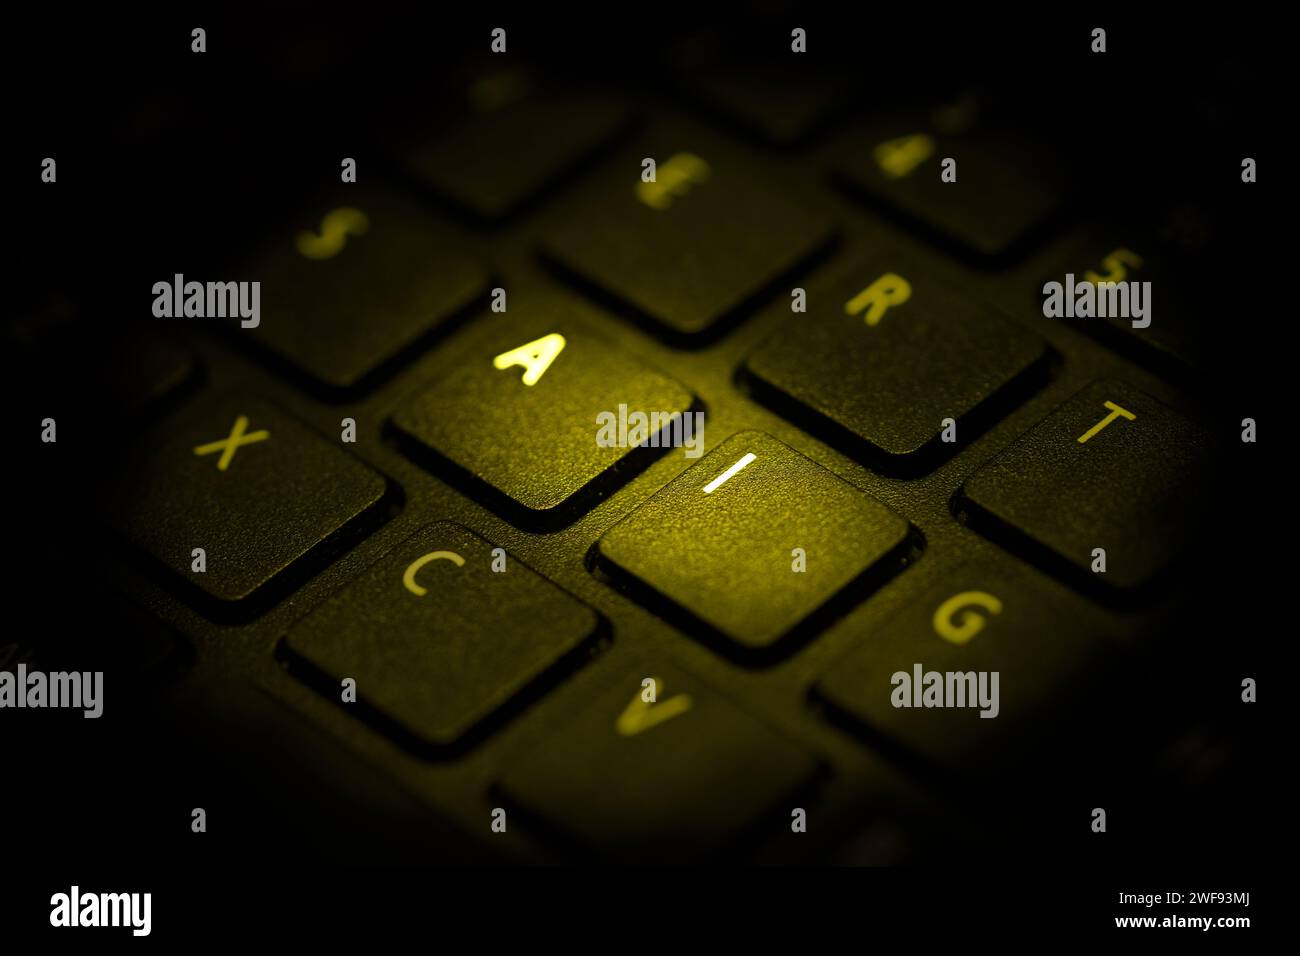 keyboard being illuminated with yellow light highlighting letters a i, close up Stock Photo